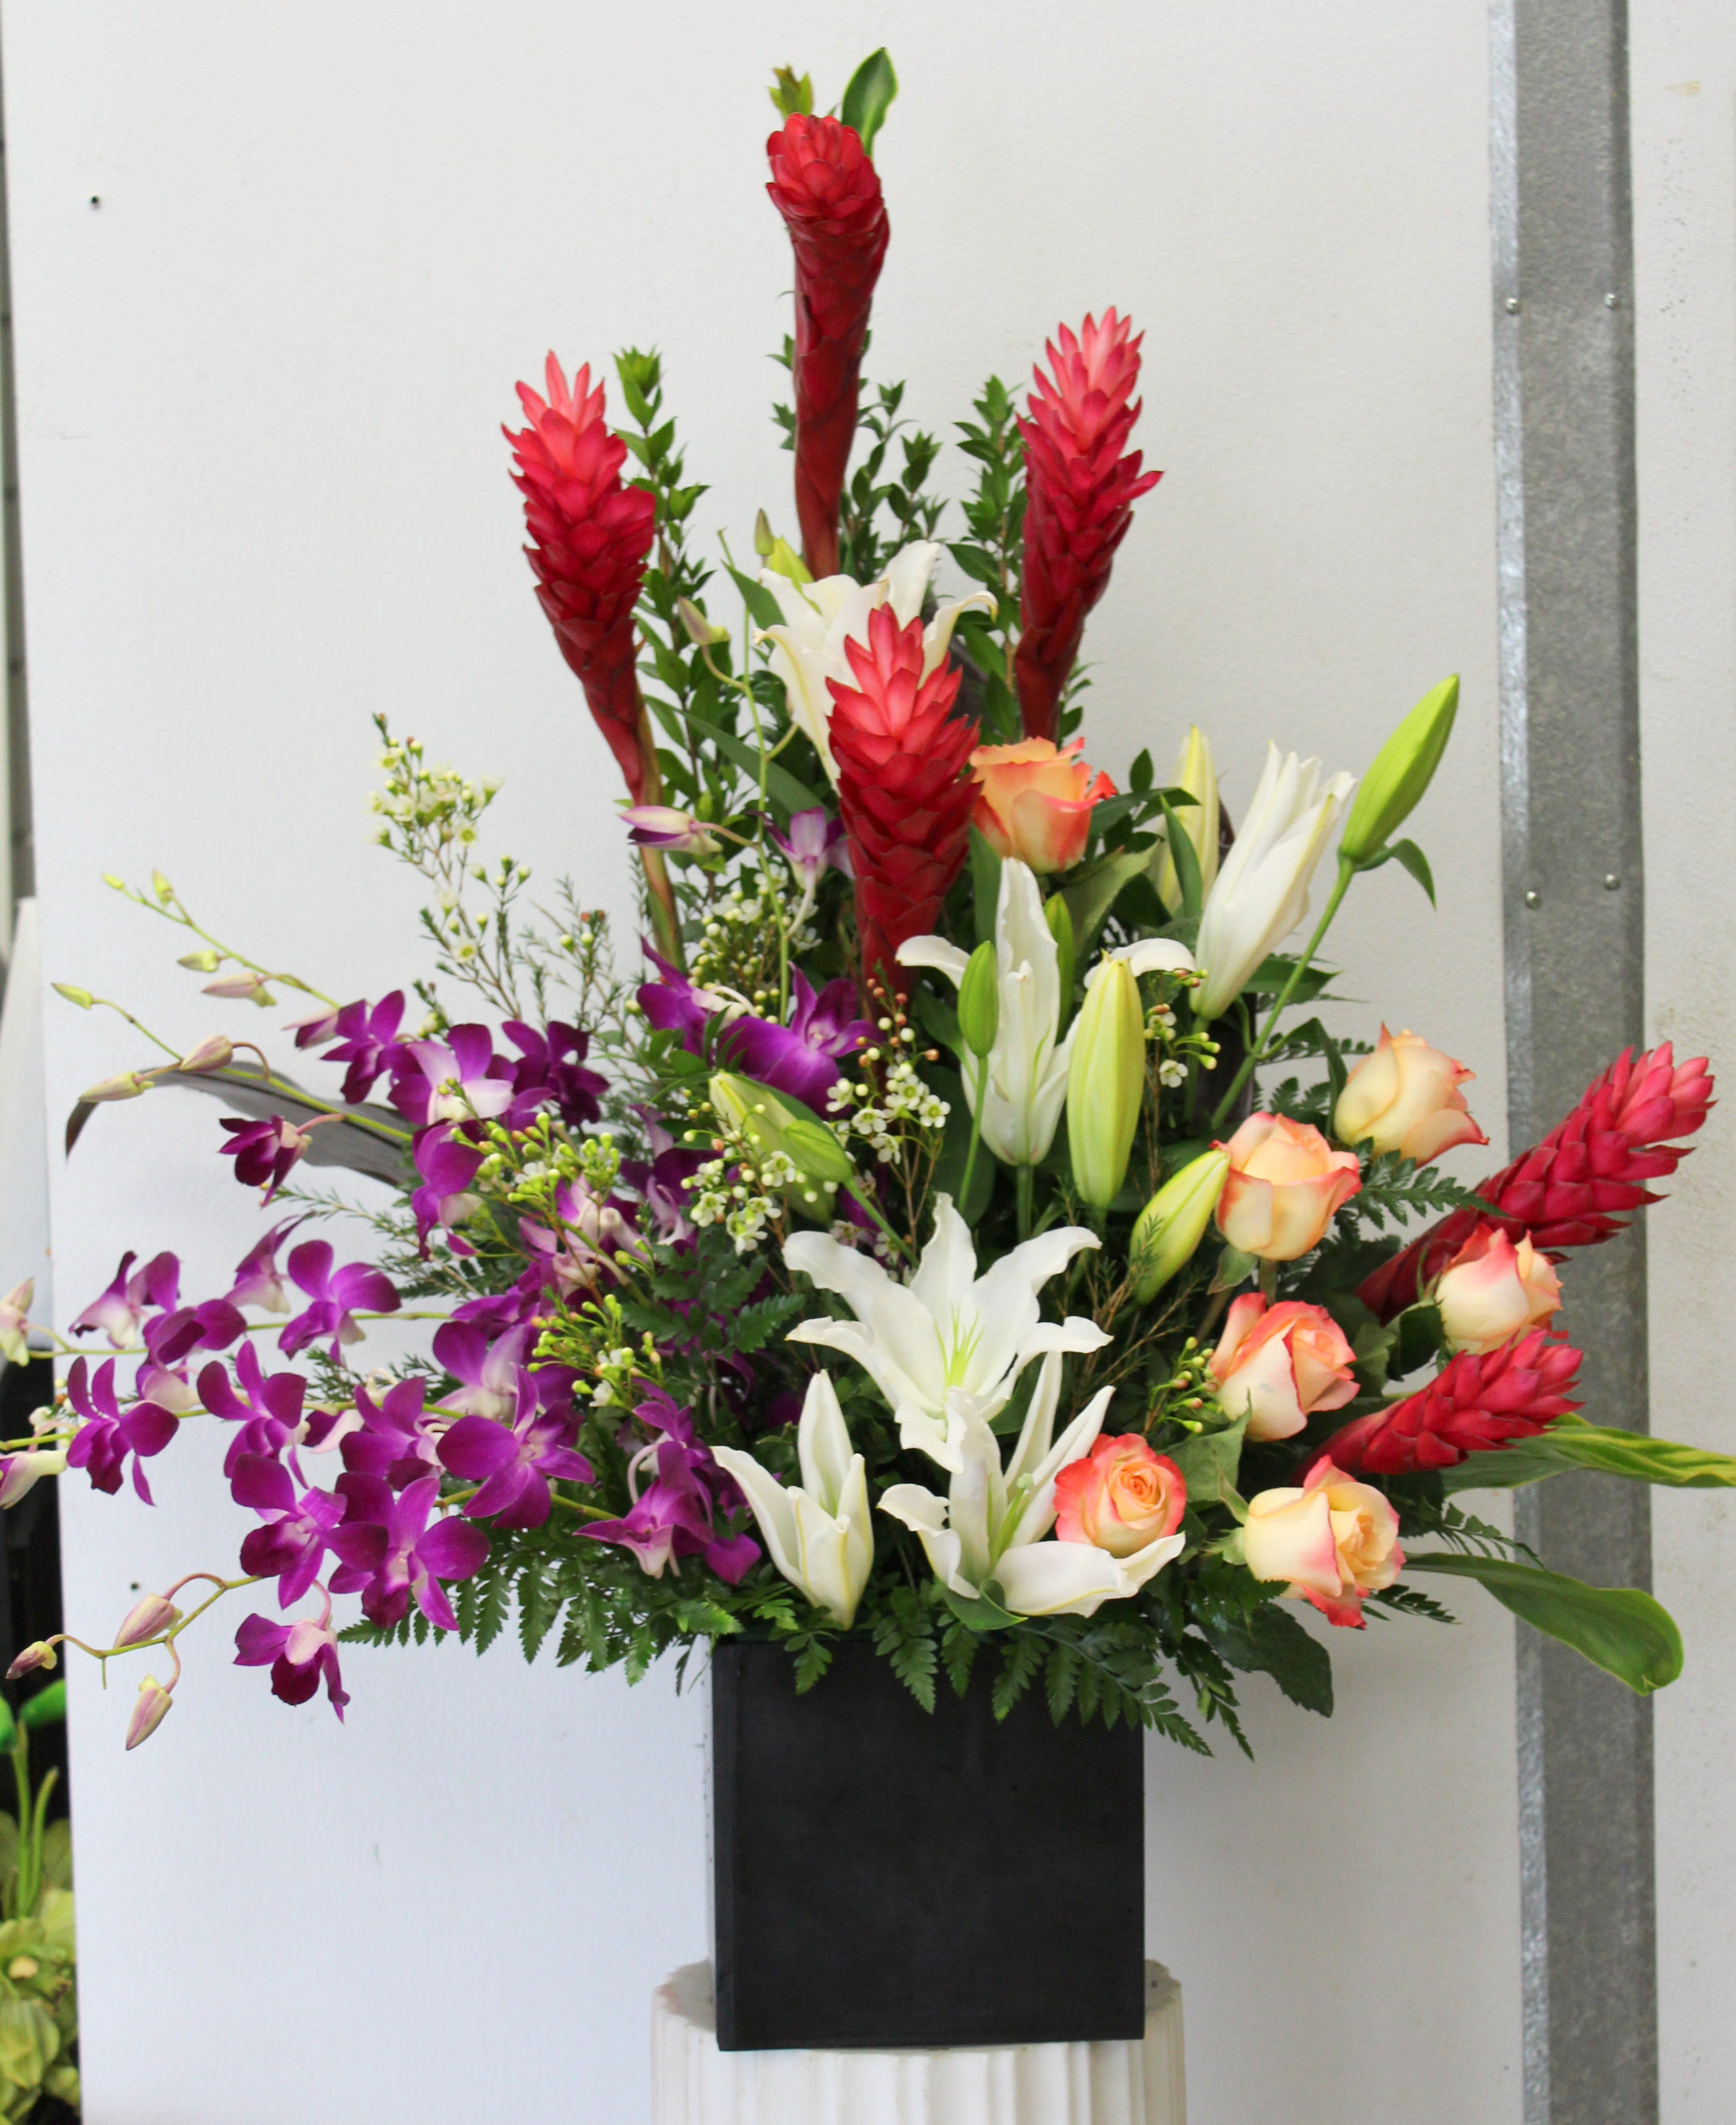 Tropical Mix - A tropical mix perfect for the Southern California flower lover!